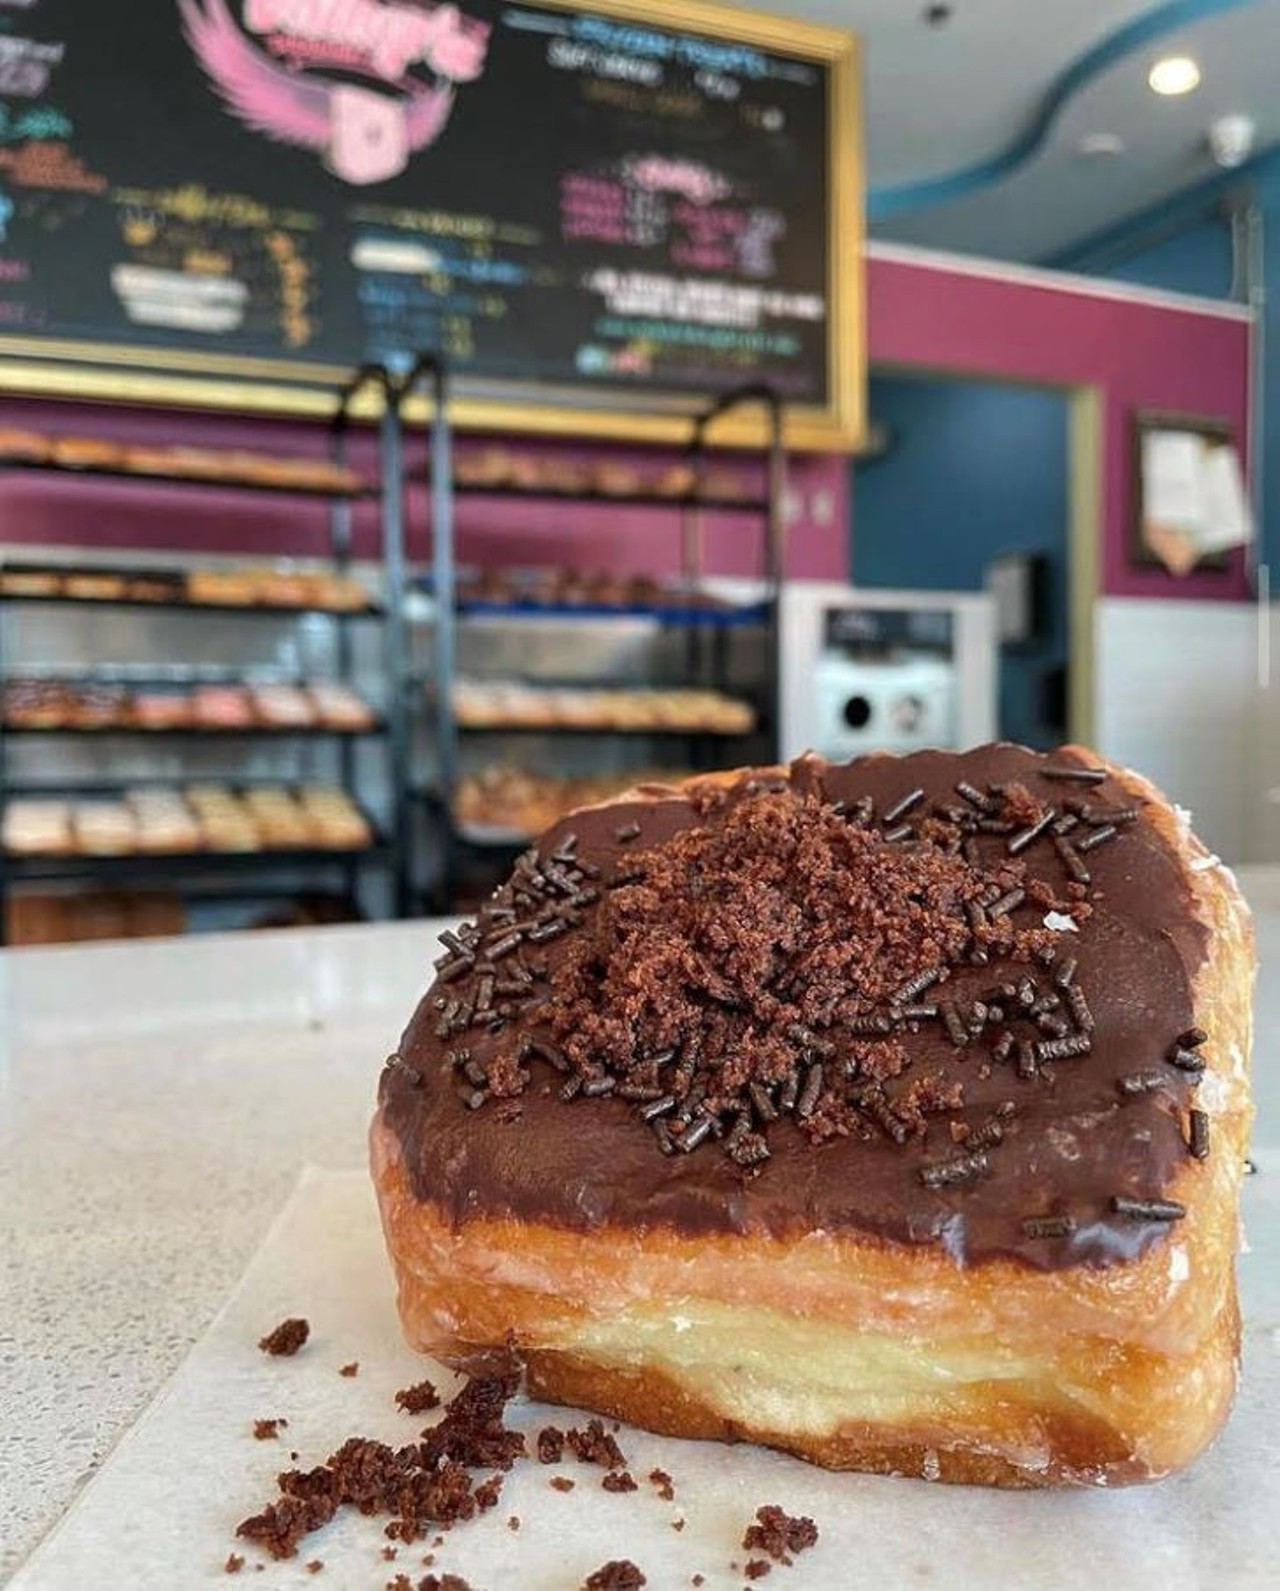 Valkyrie Doughnuts 
12226 Corporate Blvd.
Valkyrie Doughnuts has been creating egg-free, dairy-free, and vegan-friendly donuts since 2015. Their &#147;fluffy and monstrous&#148; doughnuts are so good that their recipe has been patented. 
Photo via Valkyrie Doughnuts/Instagram